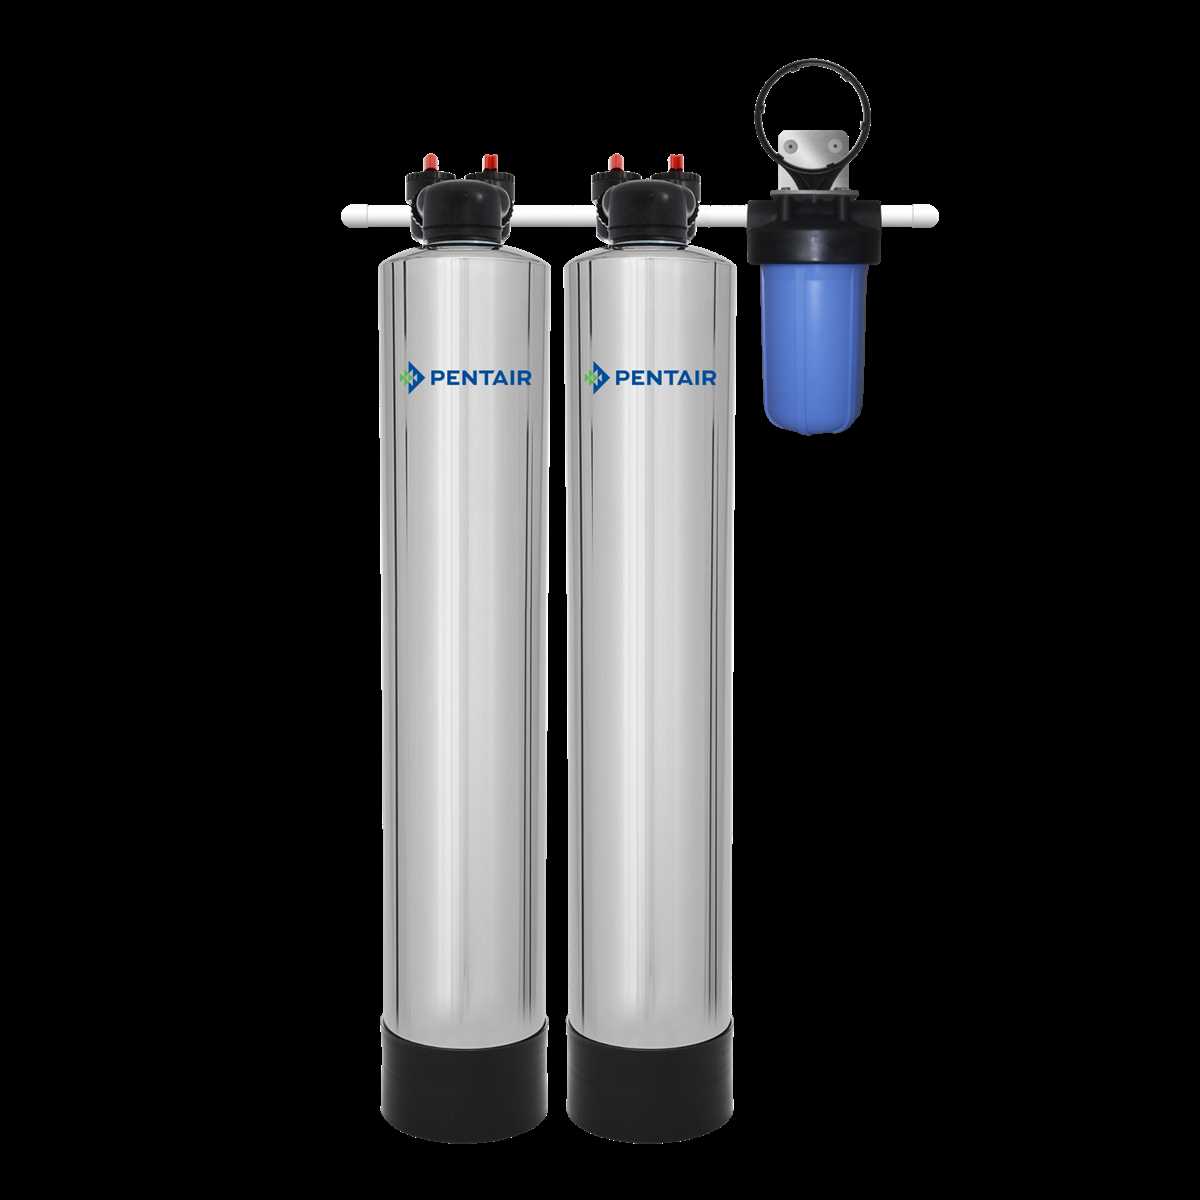 How to Install and Maintain a Water Softener